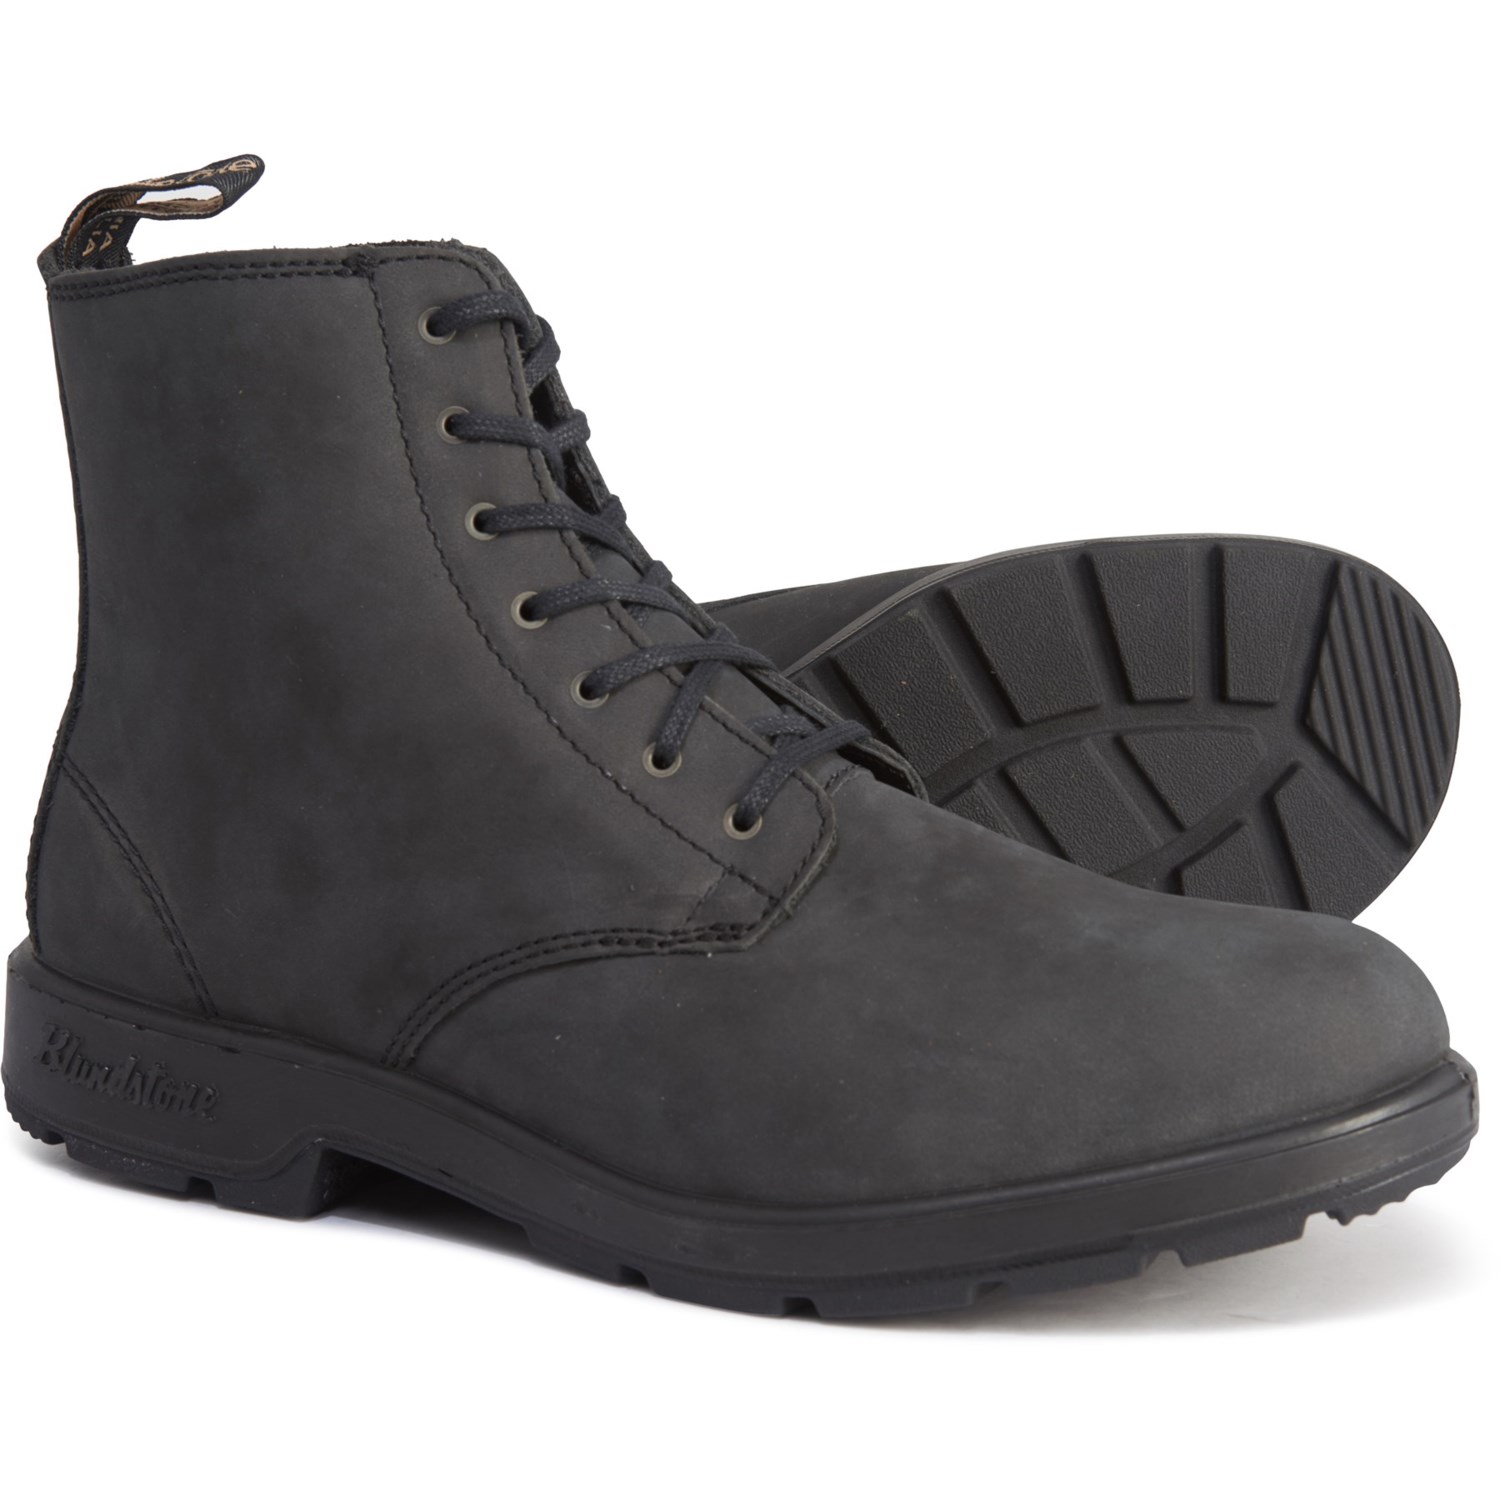 Blundstone Lace-Up Original Series Boots (For Men) - Save 42%